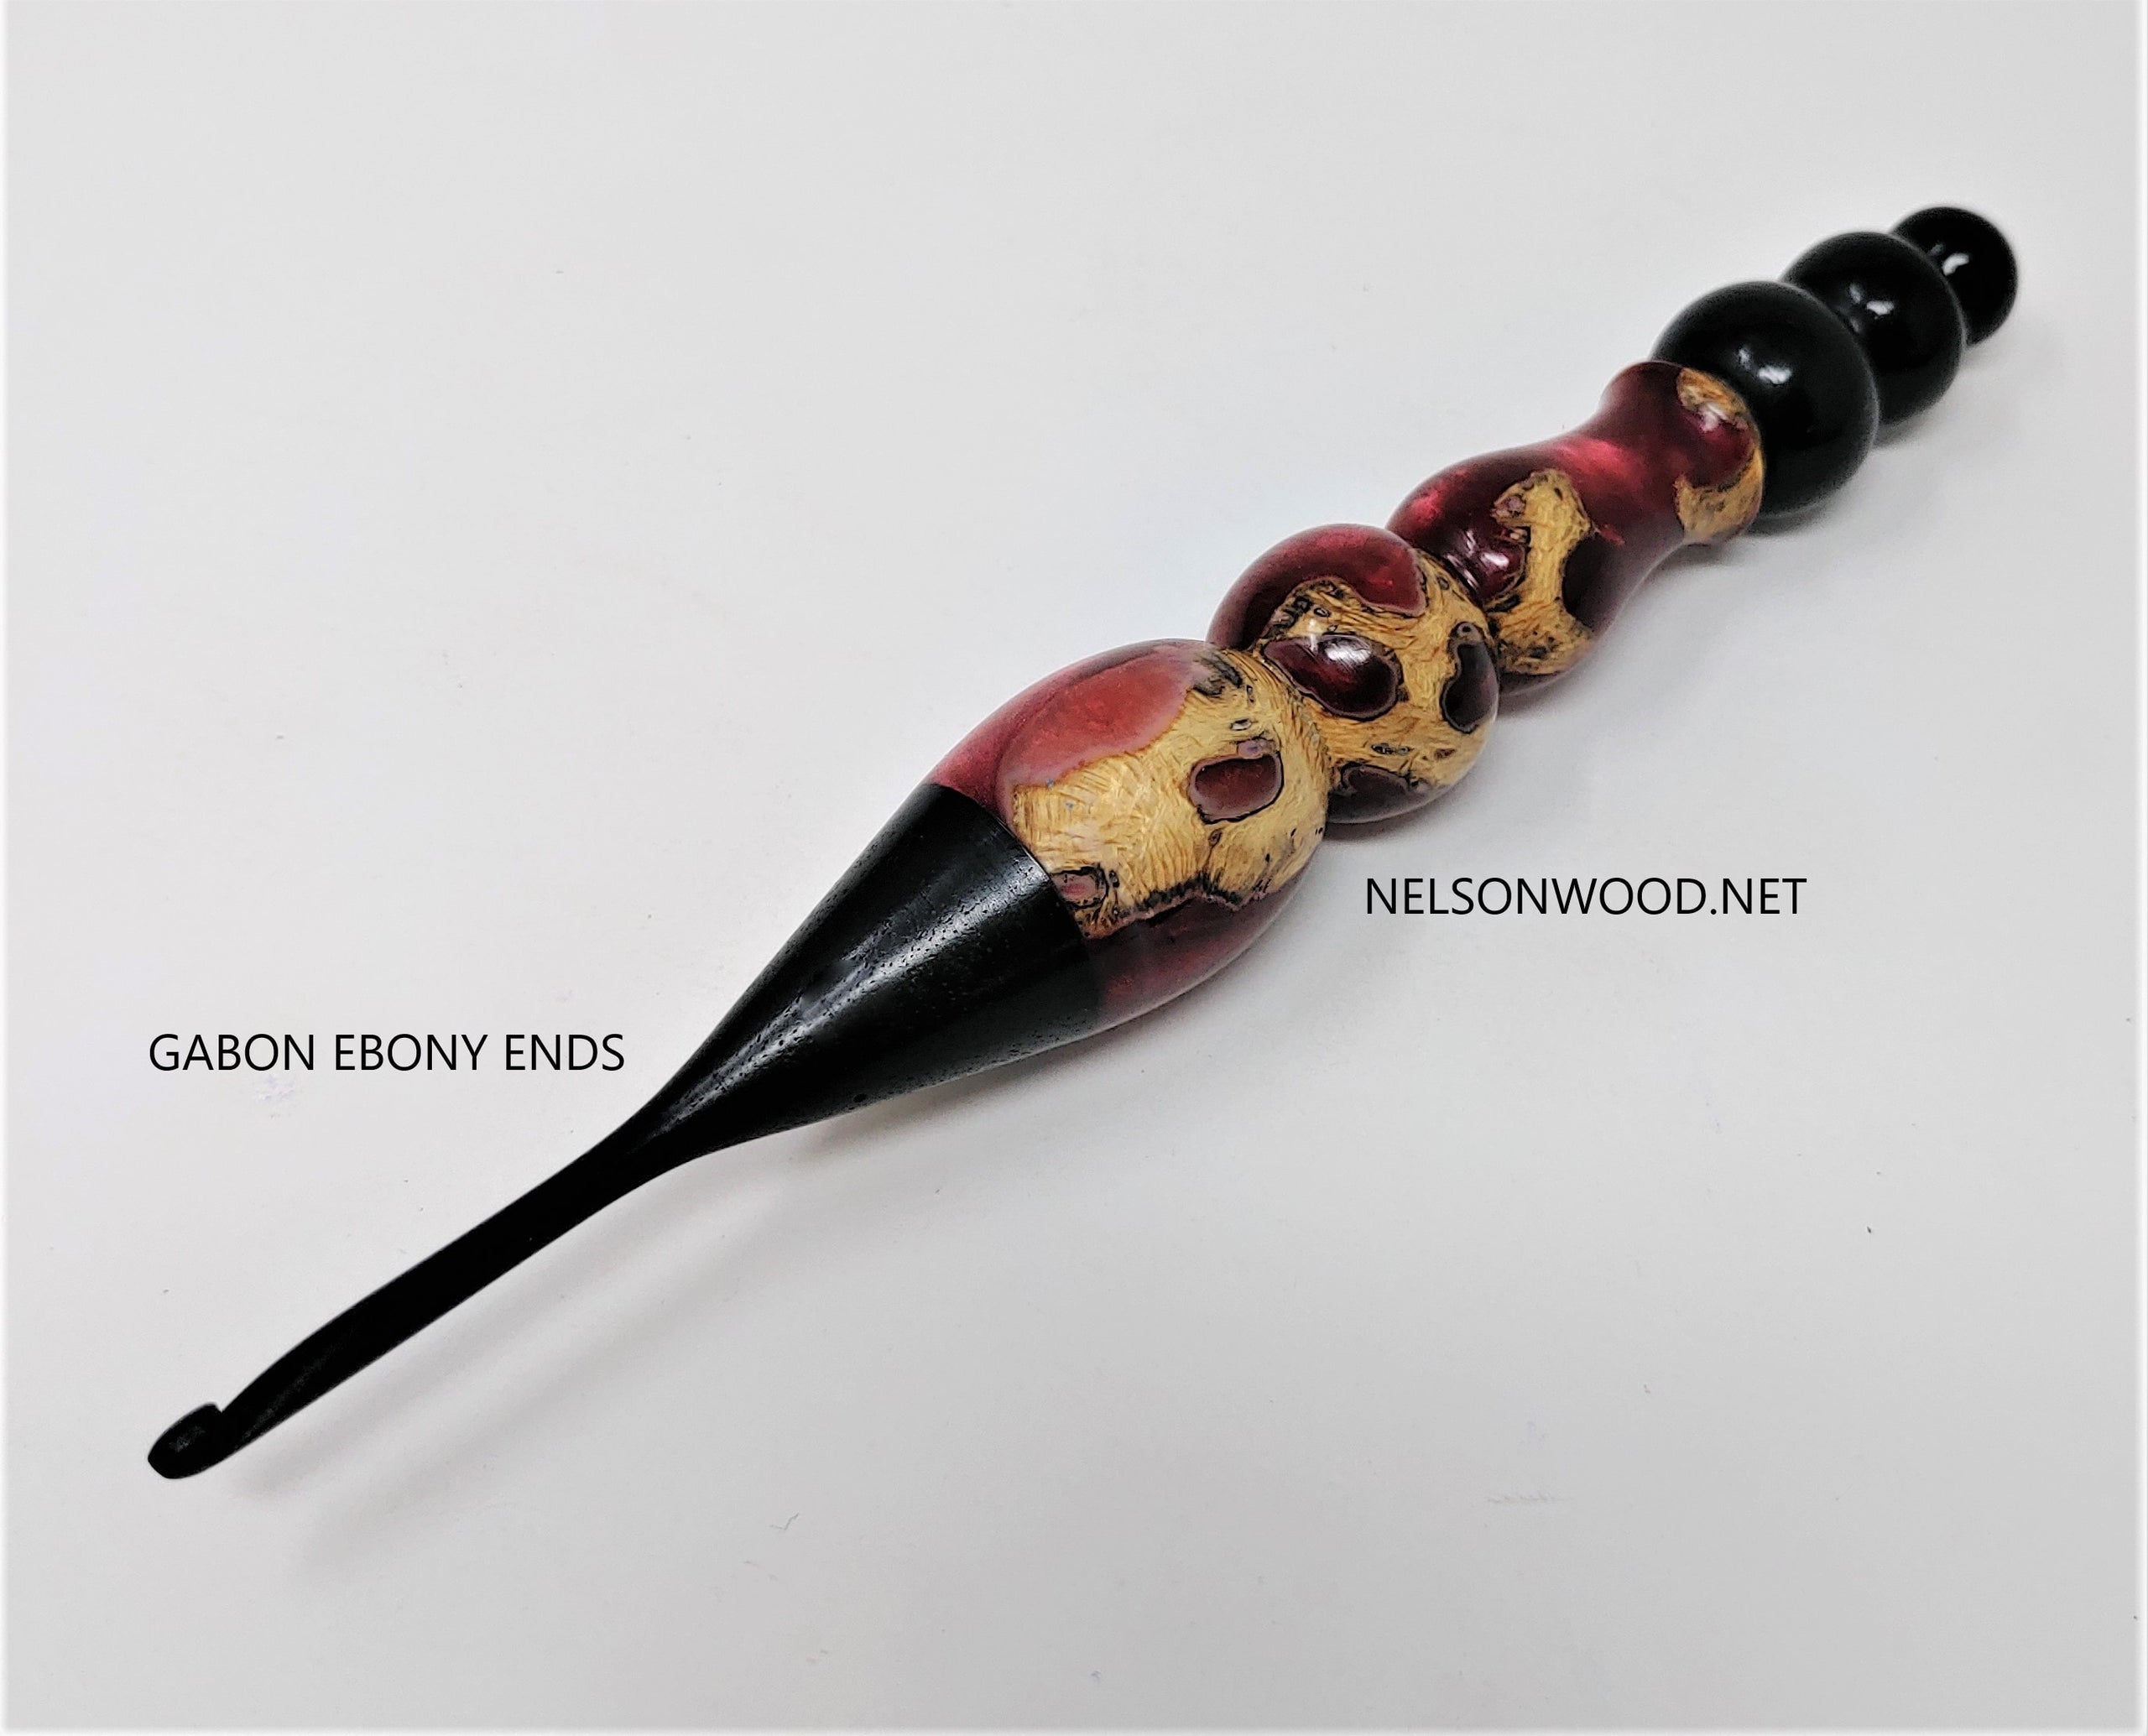 Crochet Hook made from Olivewood by Texas Artist Bryan Nelson